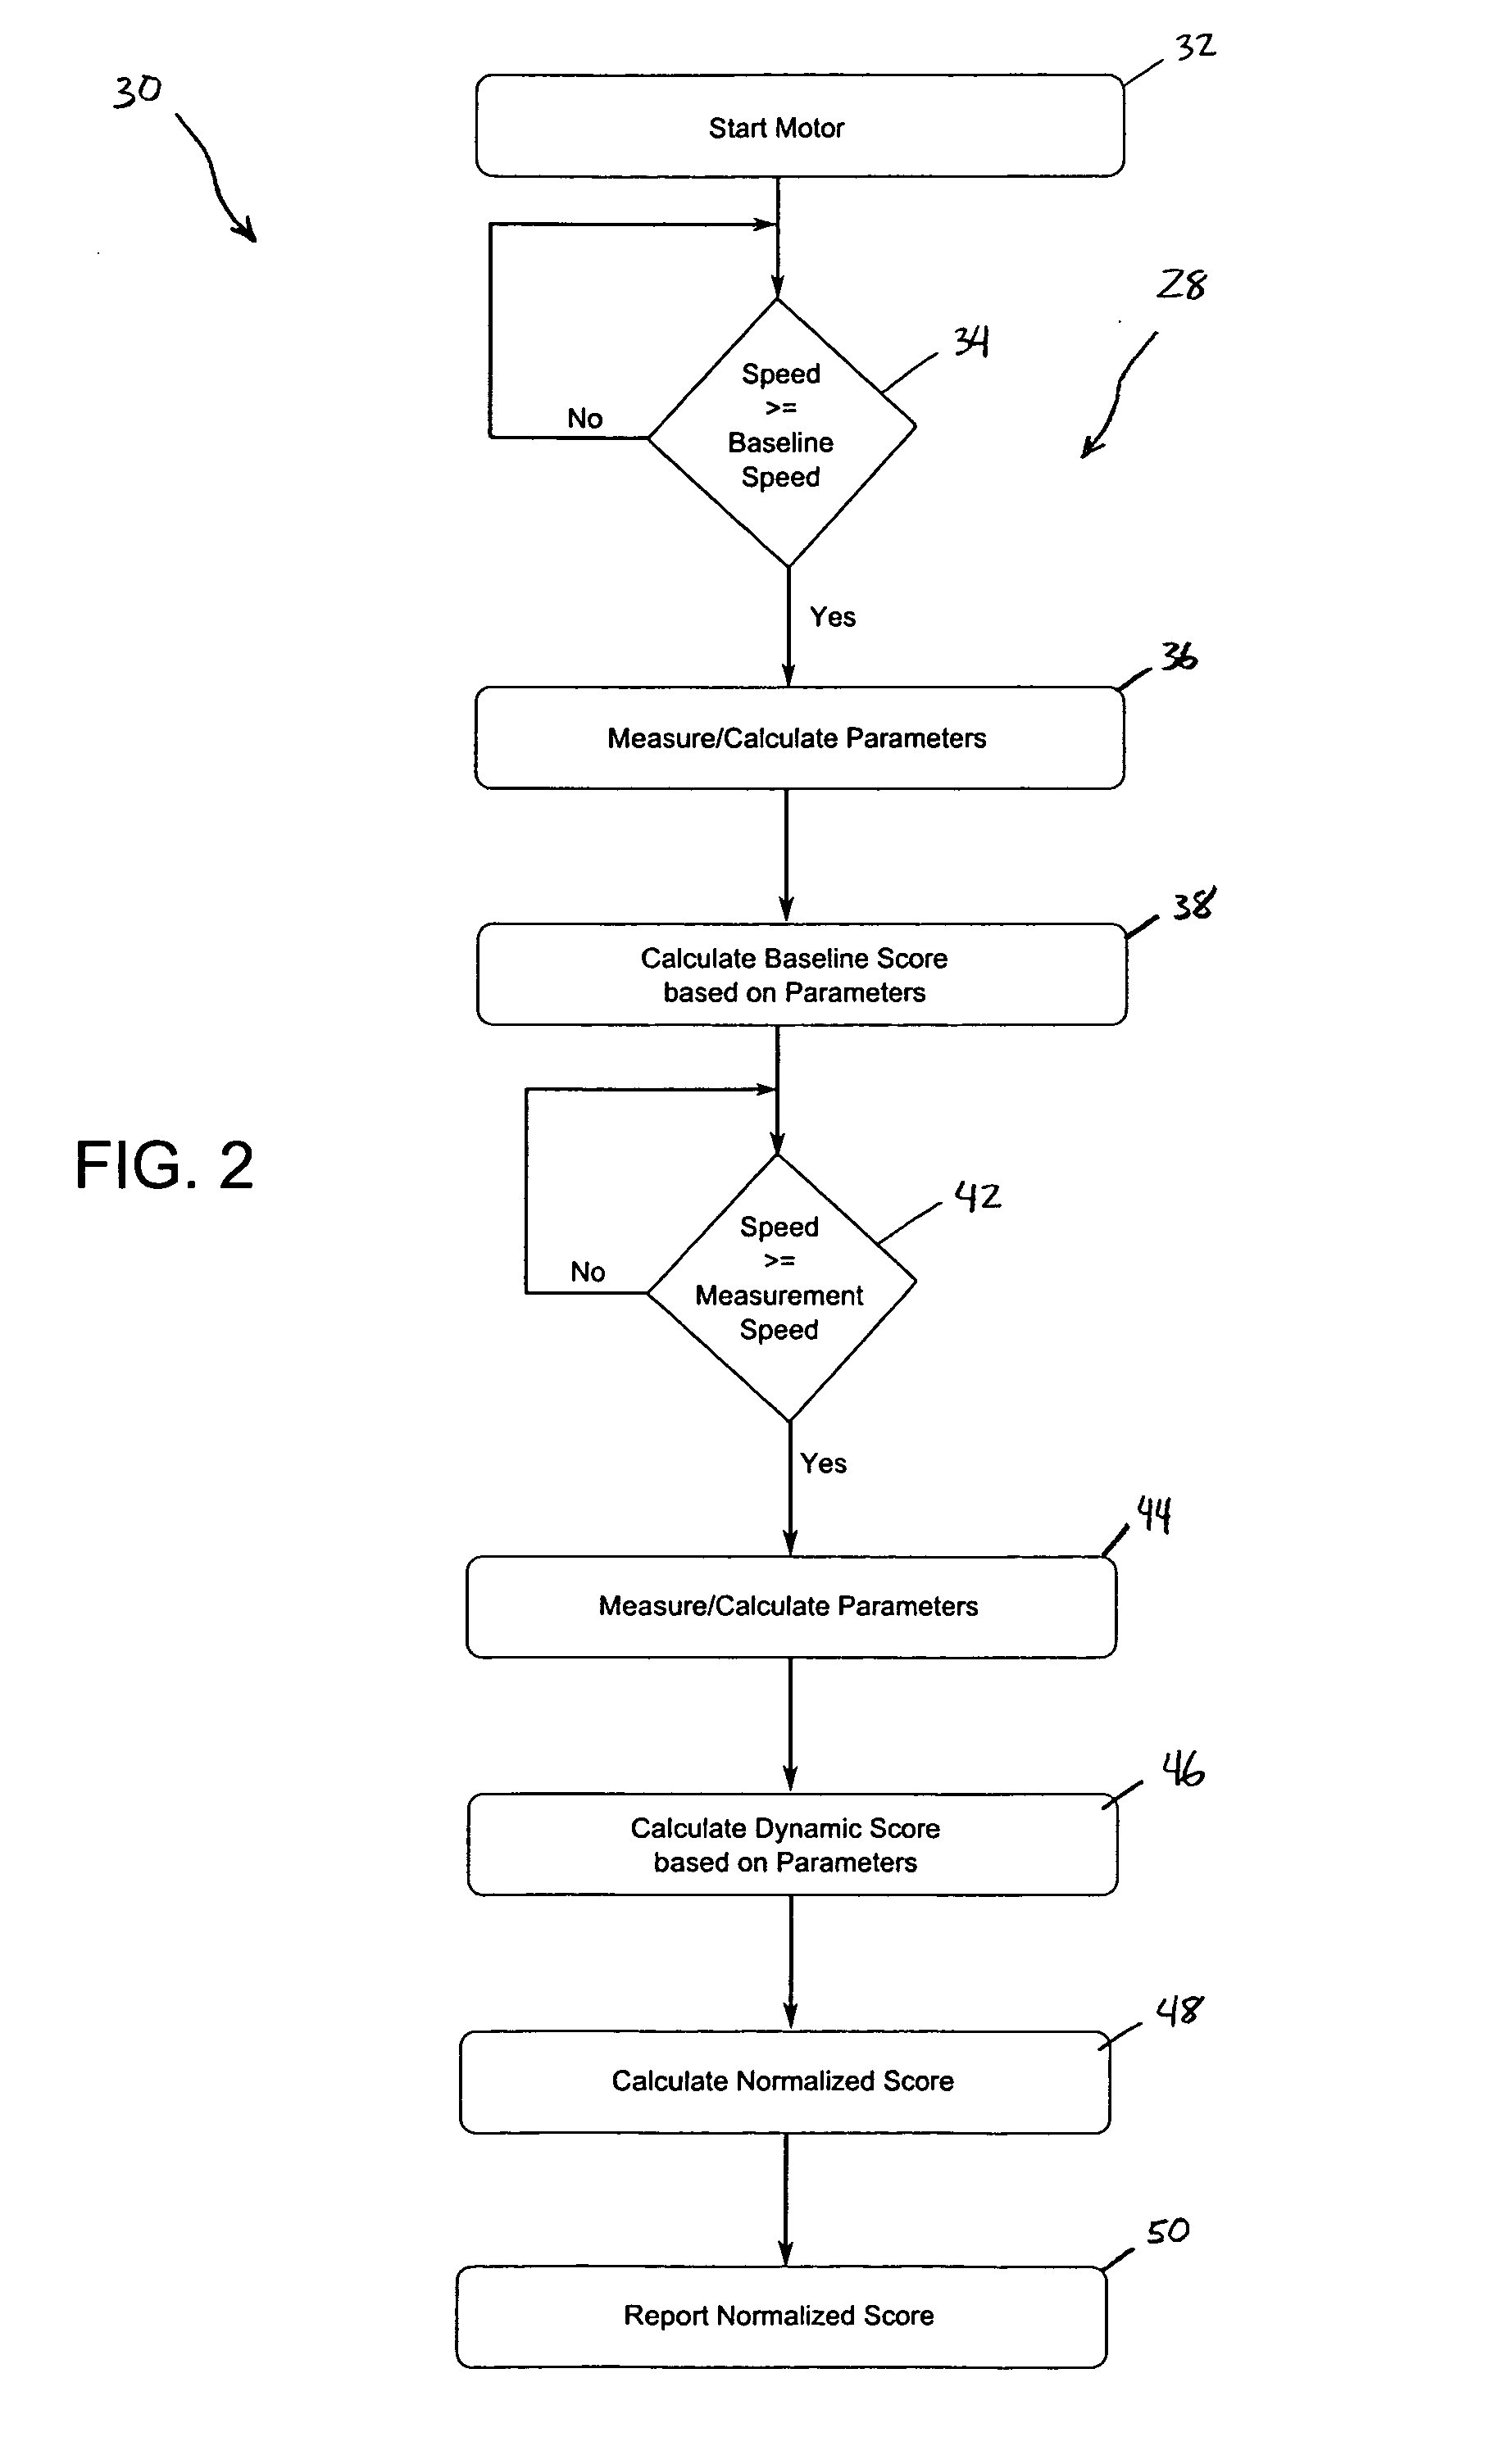 Systems and methods for detecting out-of-balance conditions in electronically controlled motors